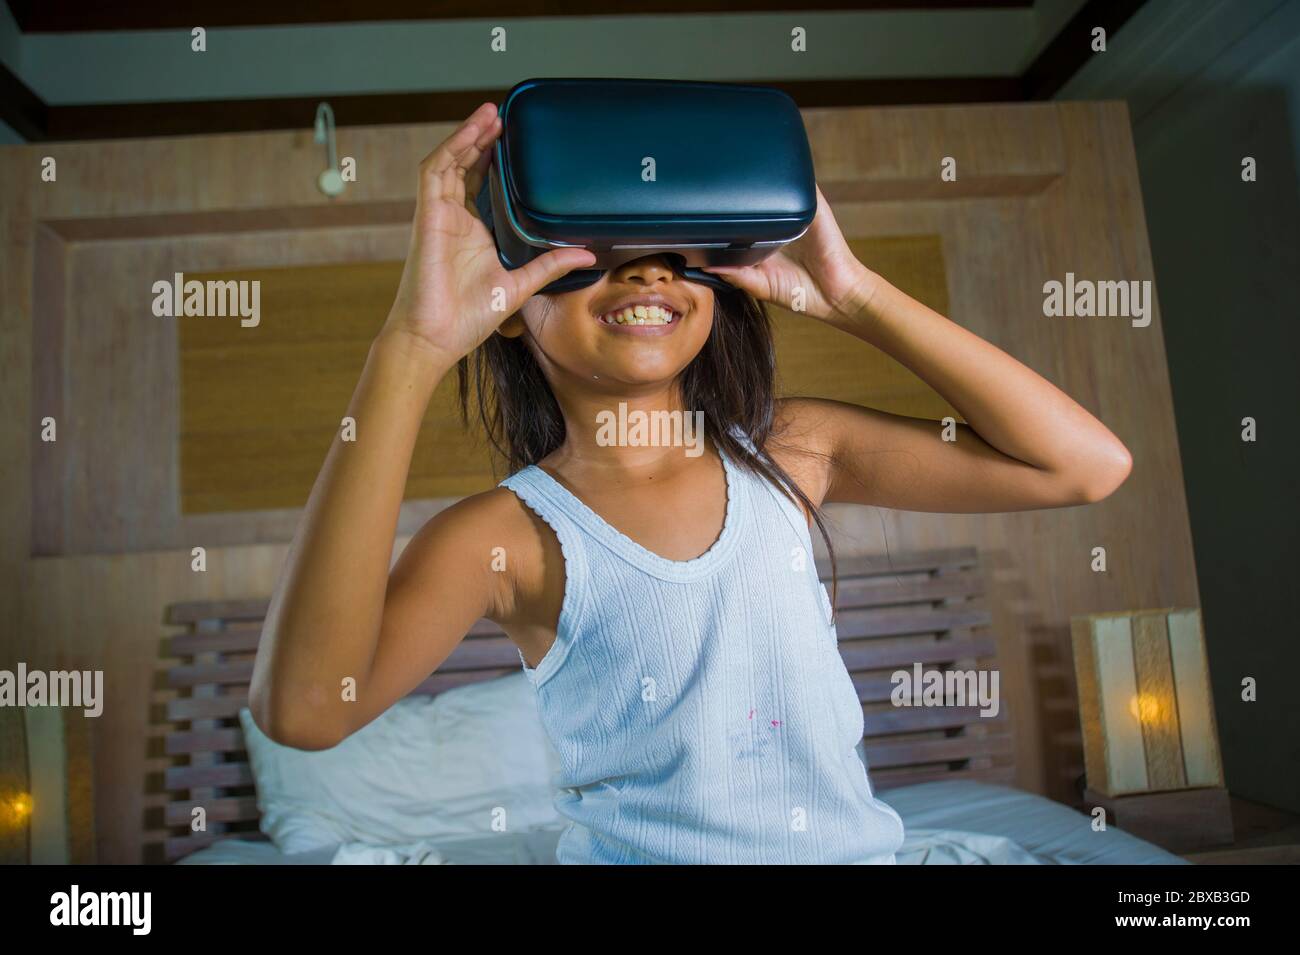 lifestyle portrait of young happy and excited female child wearing VR goggles device headset playing virtual reality simulation game enjoying an amazi Stock Photo